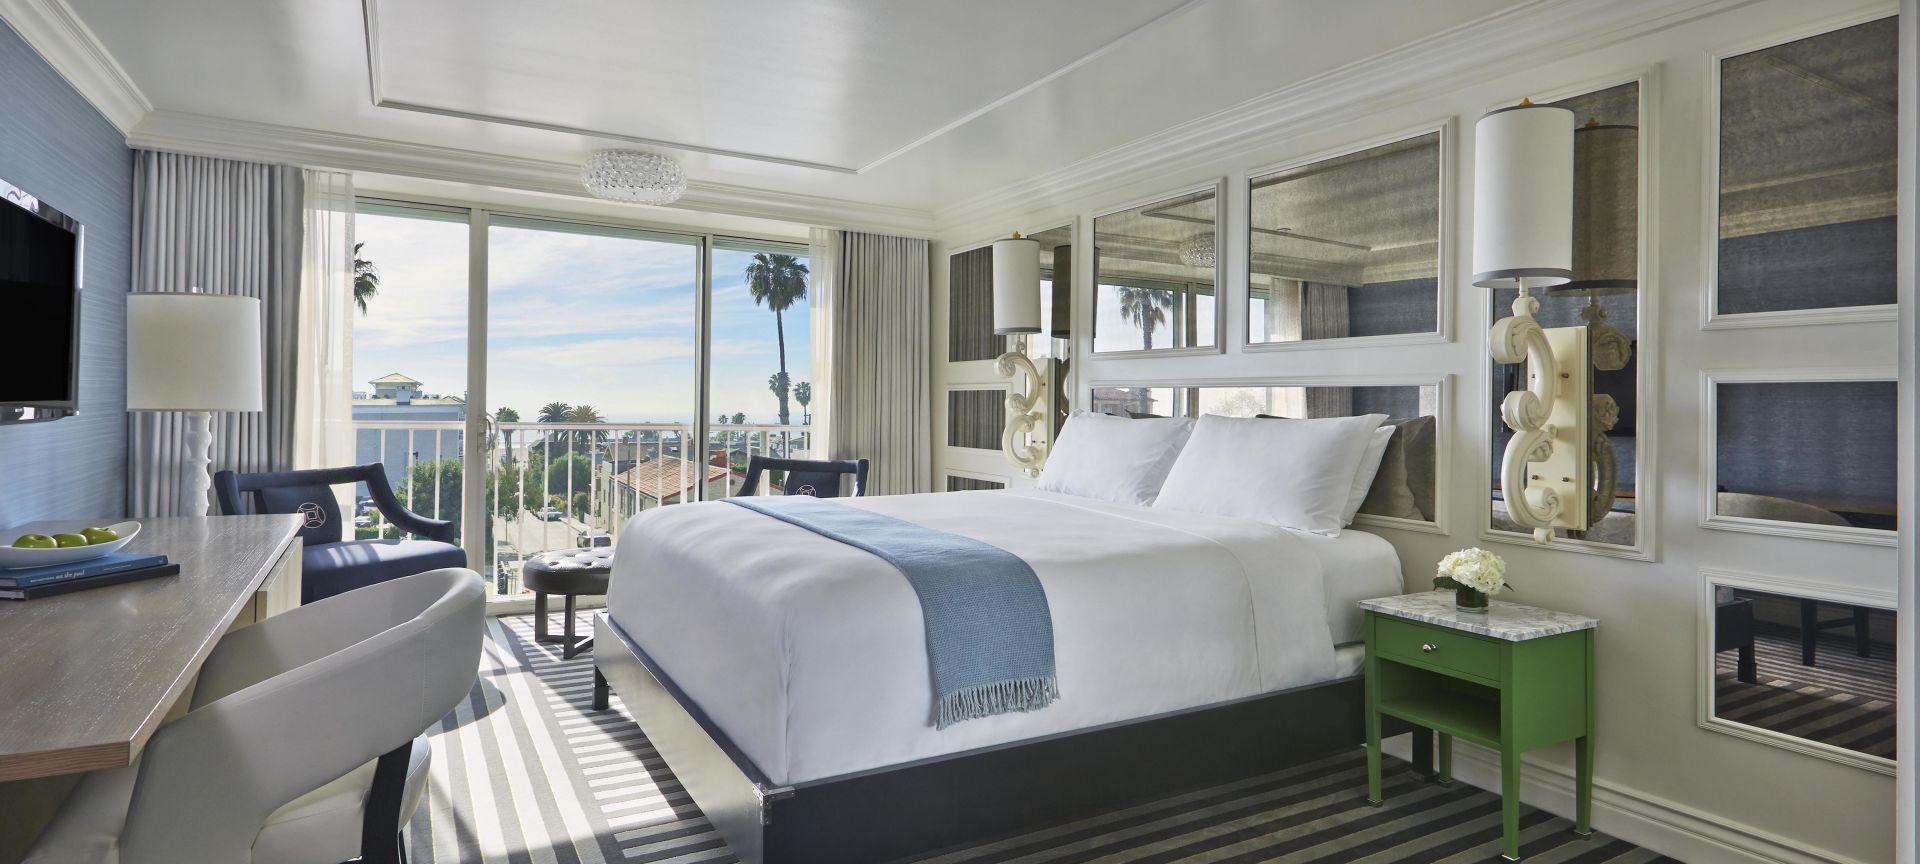 Viceroy Santa Monica guestroom with a view 